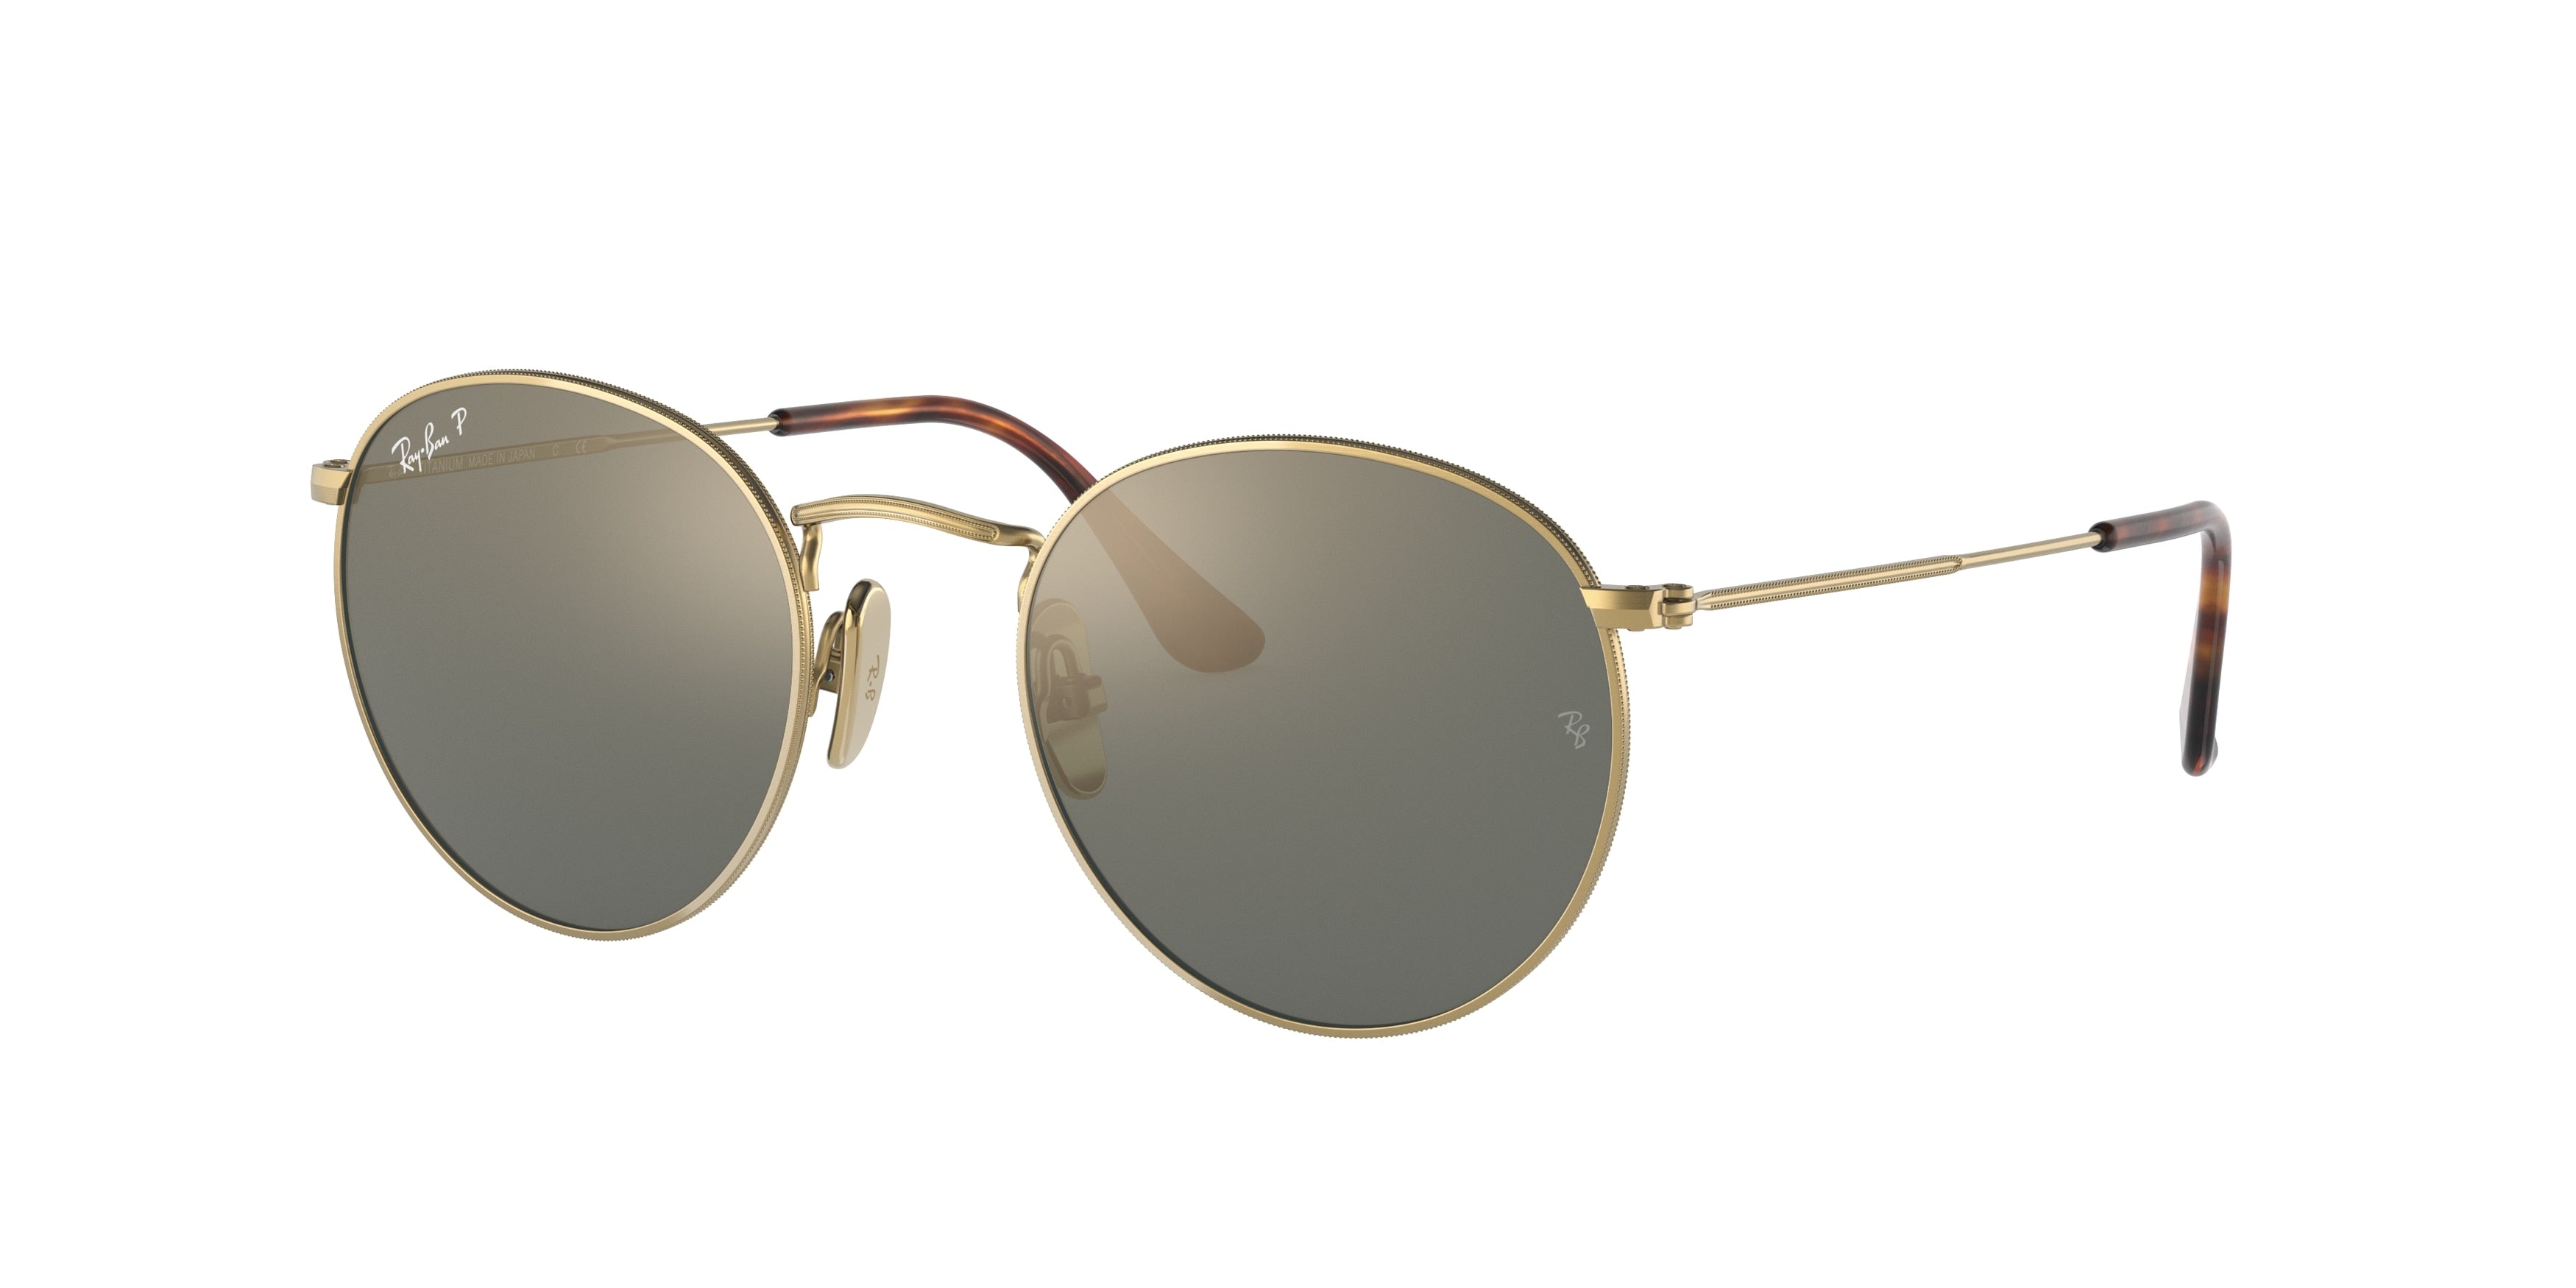 Ray-Ban ROUND RB8247 Phantos Sunglasses  9217T0-Gold 50-145-21 - Color Map Gold